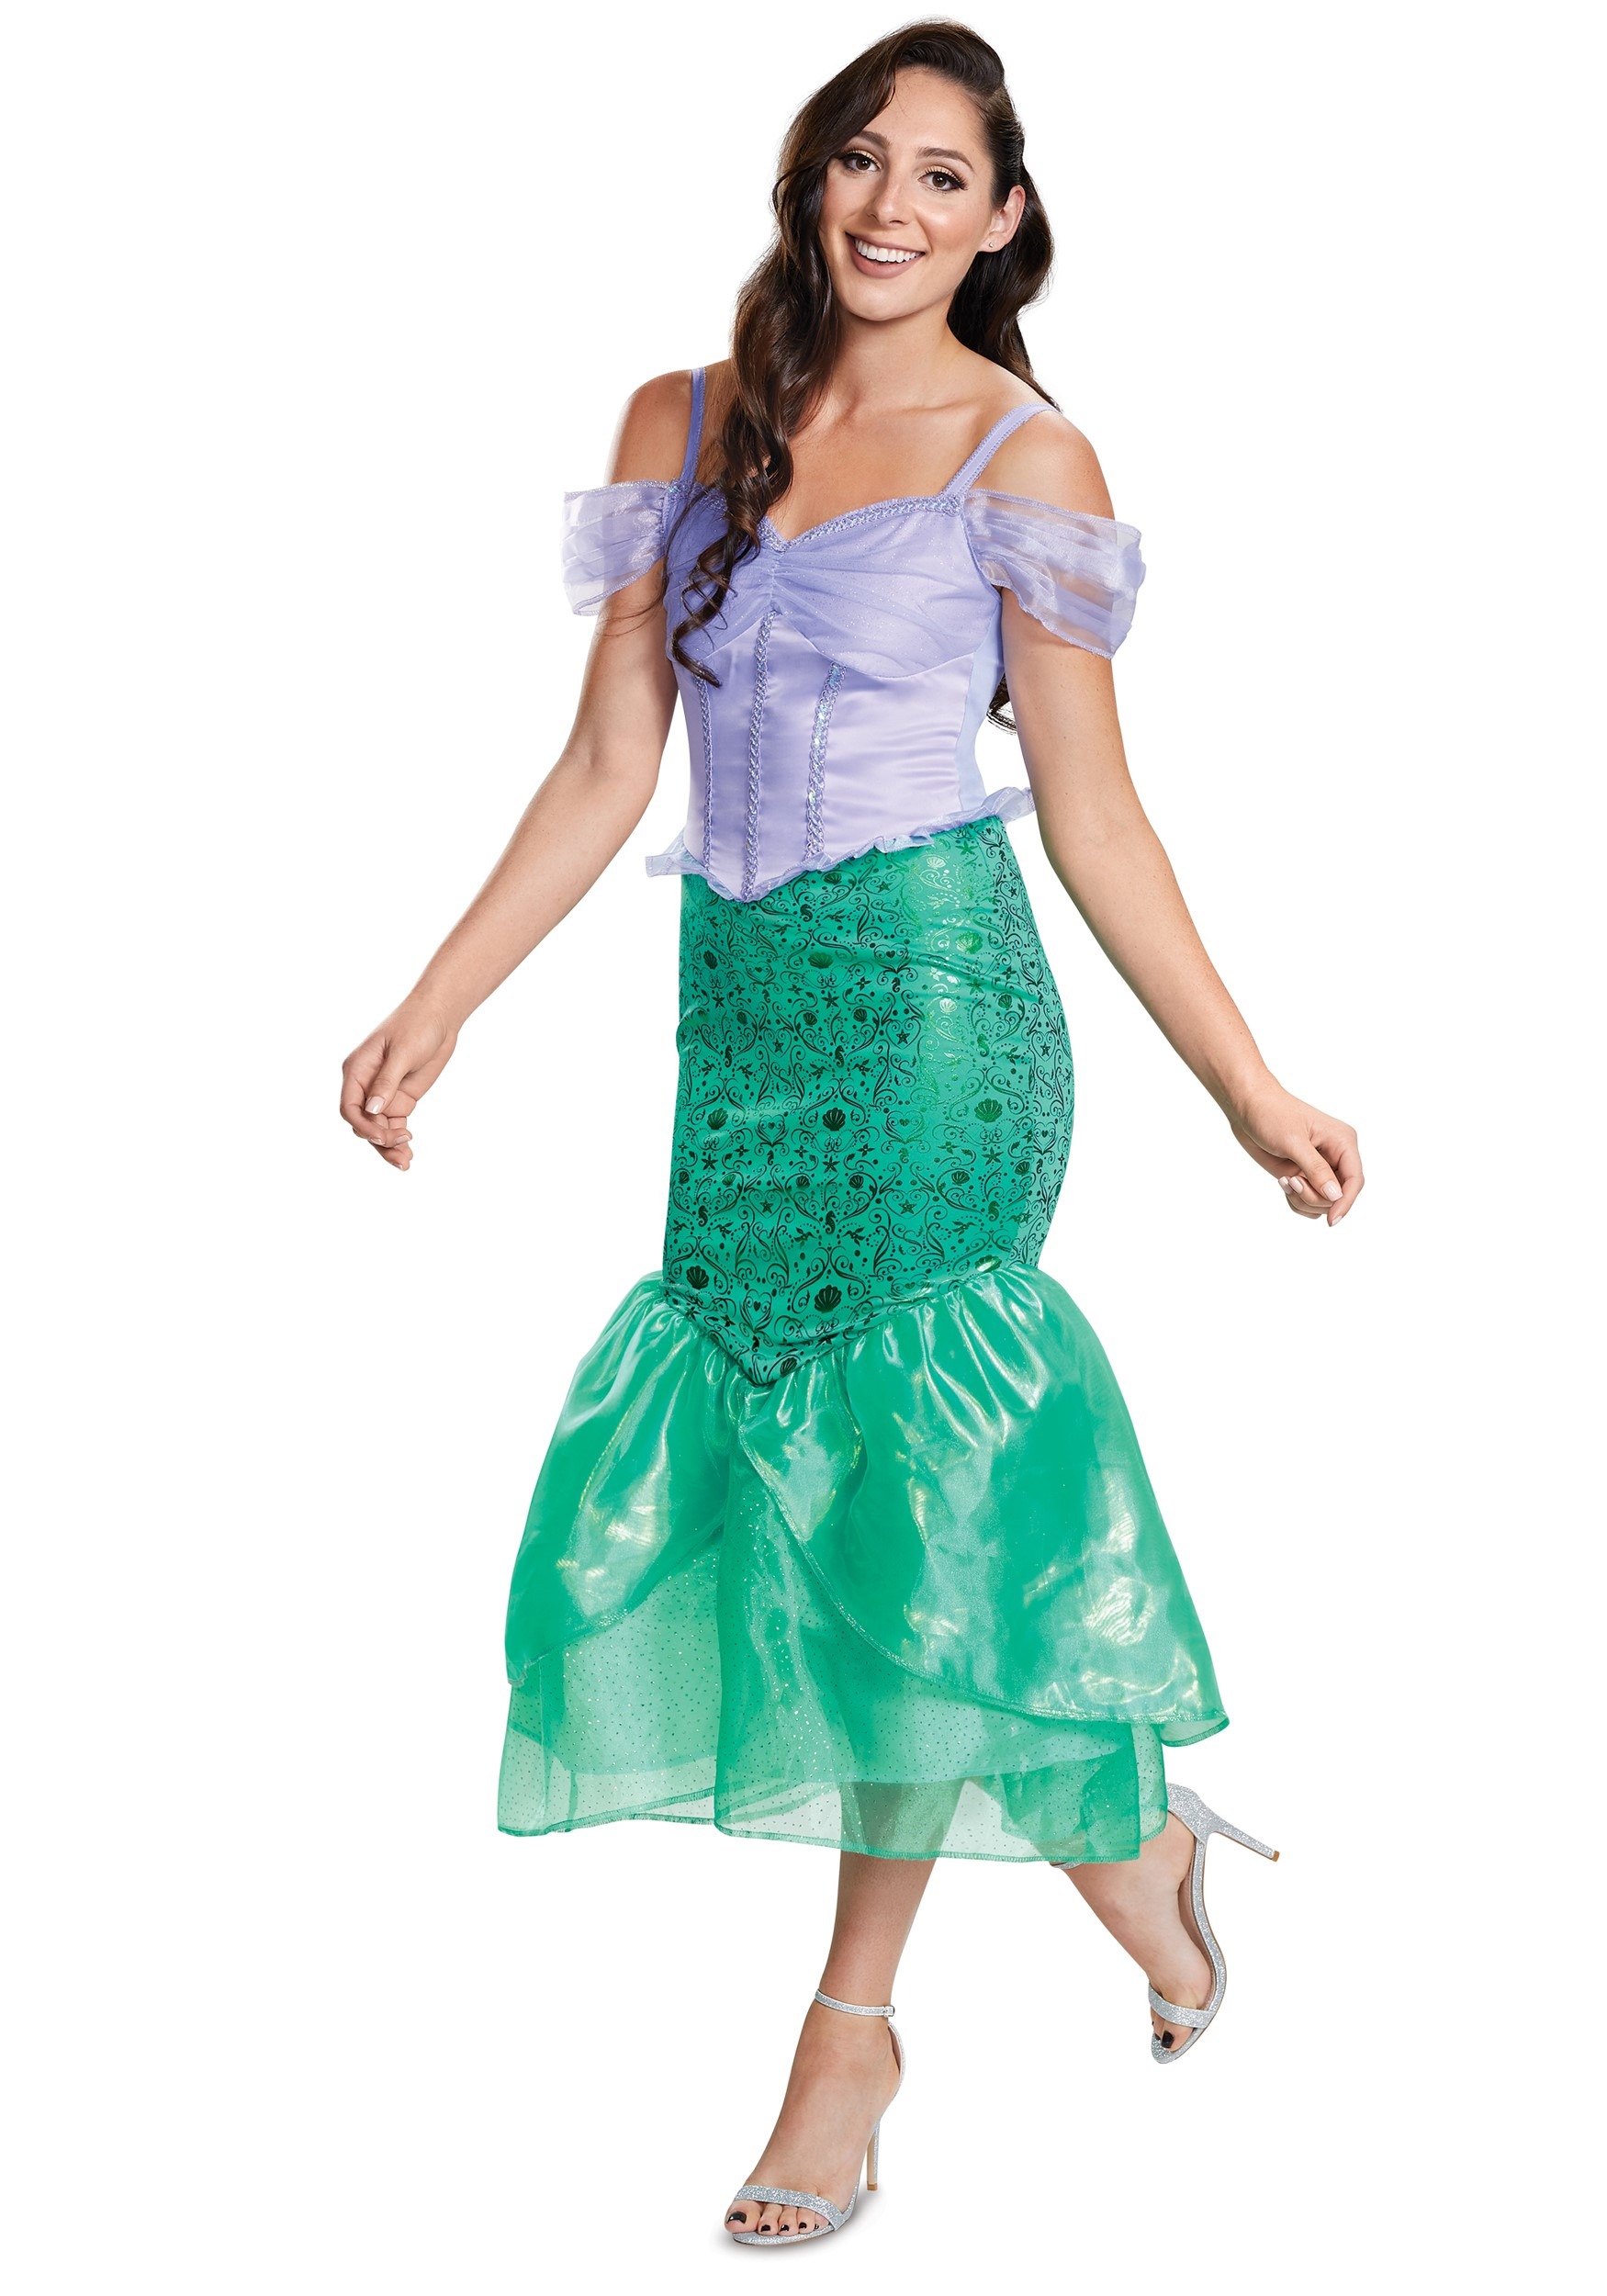 Photos - Fancy Dress Deluxe Disguise  Ariel Costume Adult The Little Mermaid Purple/Green DI 